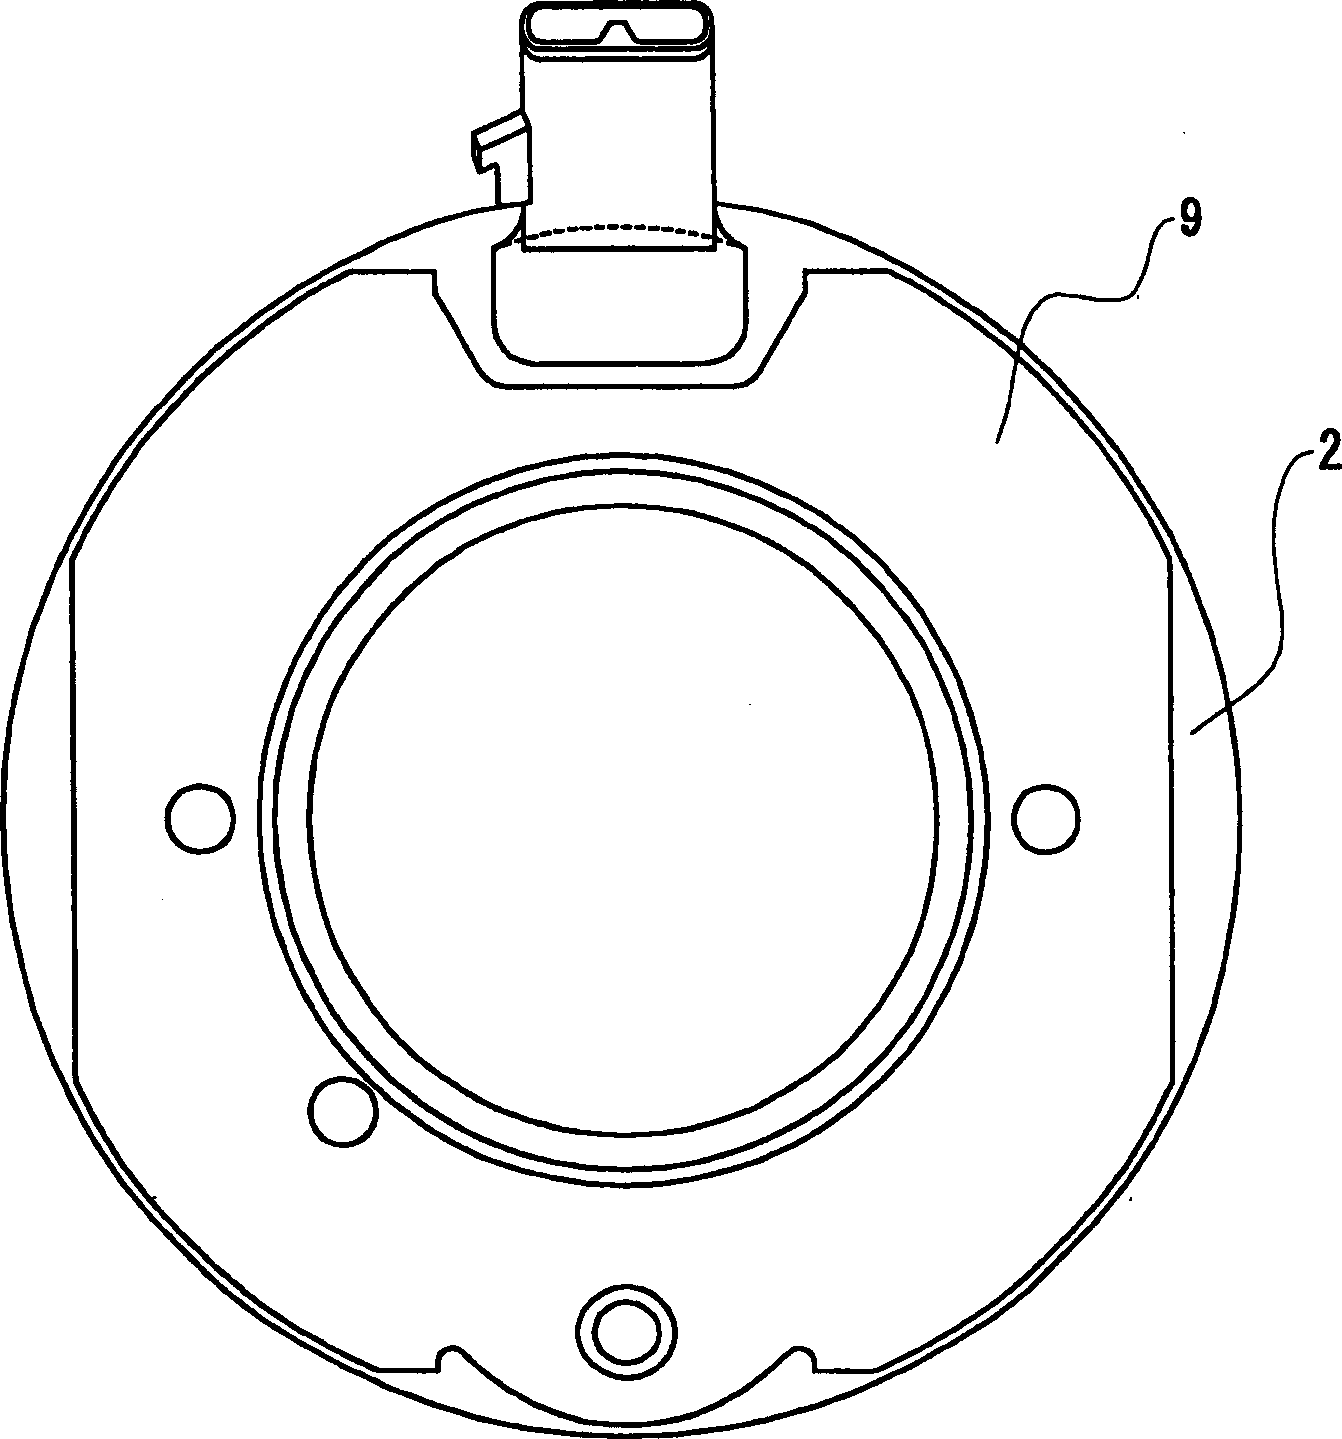 Electronmagnetic clutch